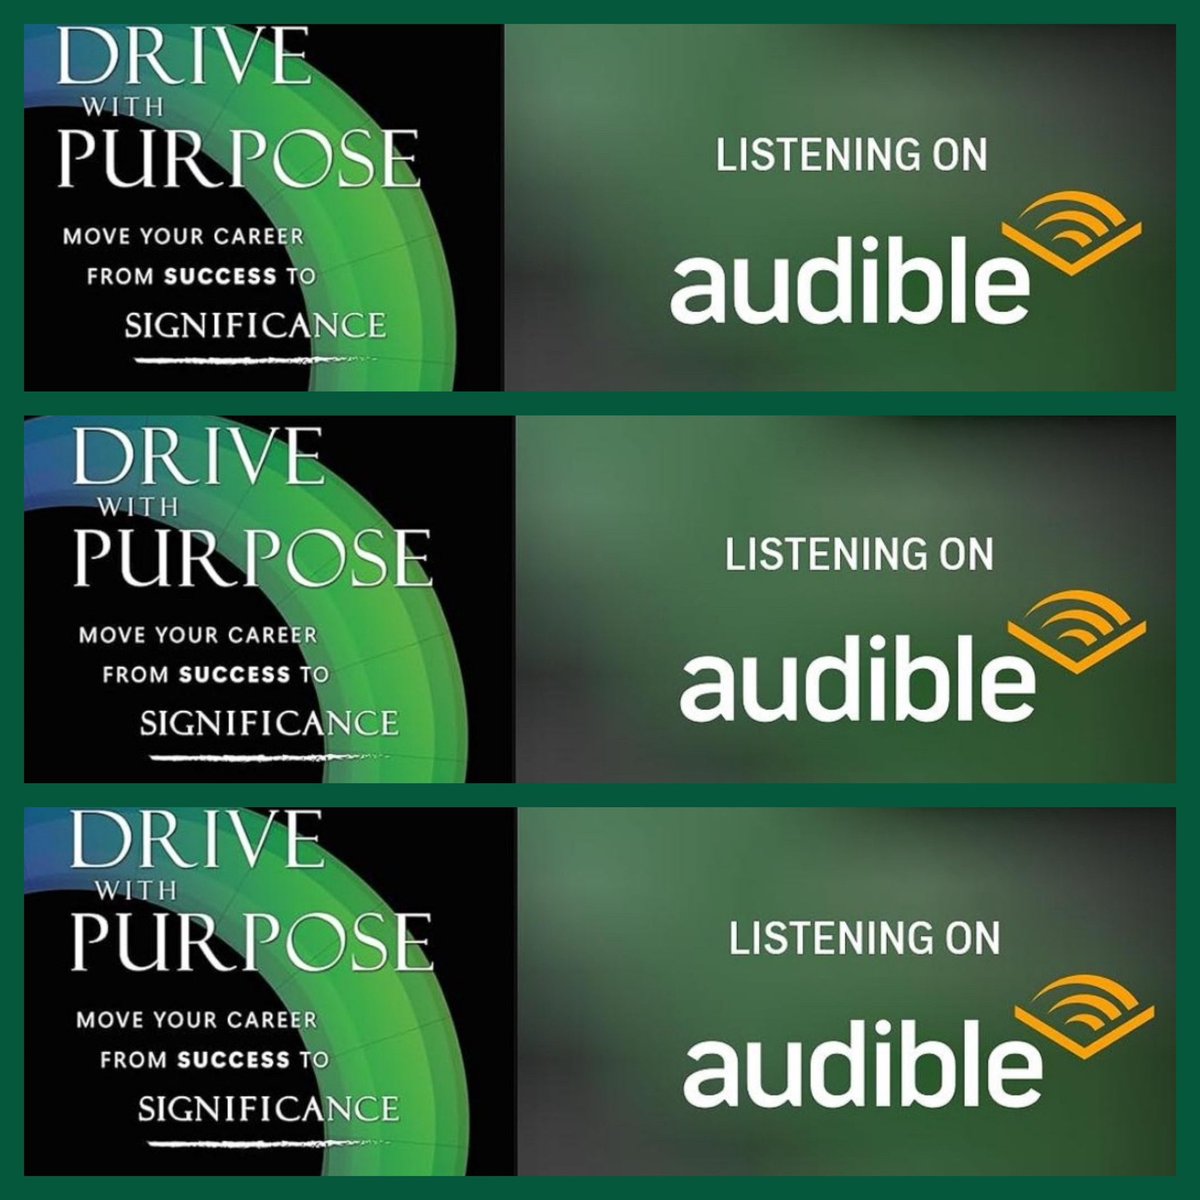 Pick up a copy for you, your friends, or your team and NOW Available to “listen” on Audible while you #DriveWithPurpose Drive With Purpose: Move Your Career from Success to Significance a.co/d/9YbHppM